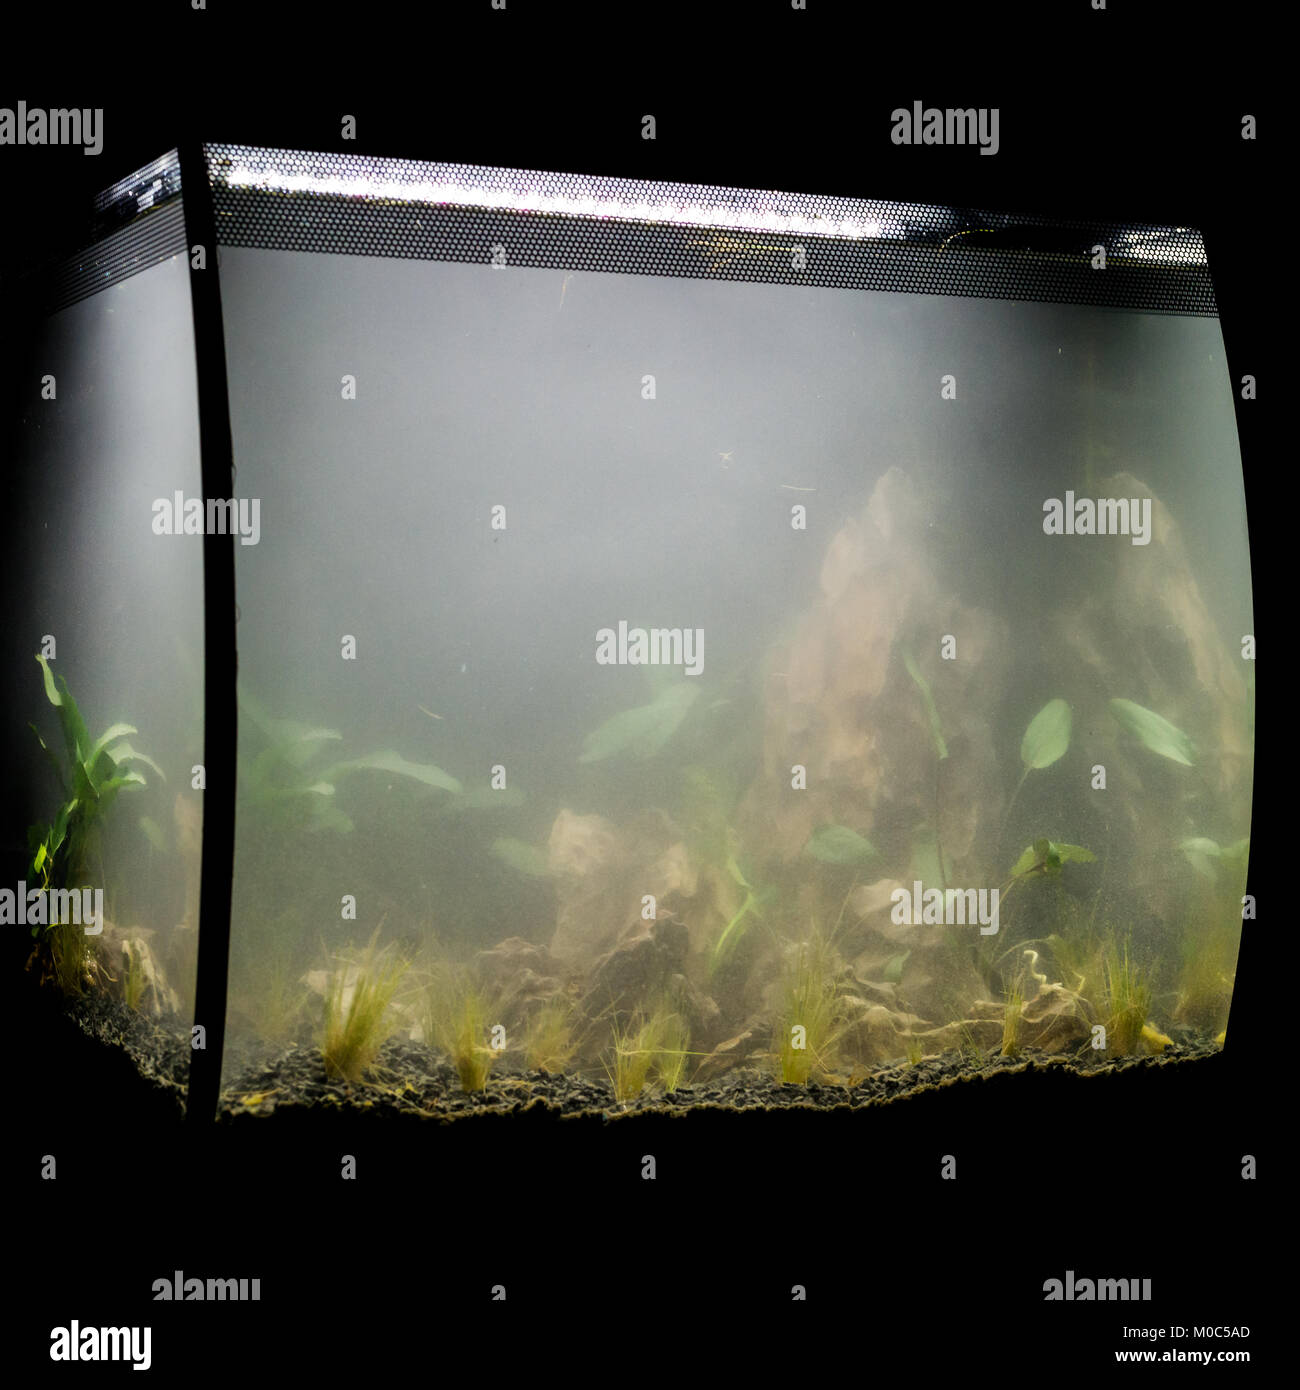 A shot of a Fluval Flex 57 aquascape showing the foggy water just after planting. Stock Photo